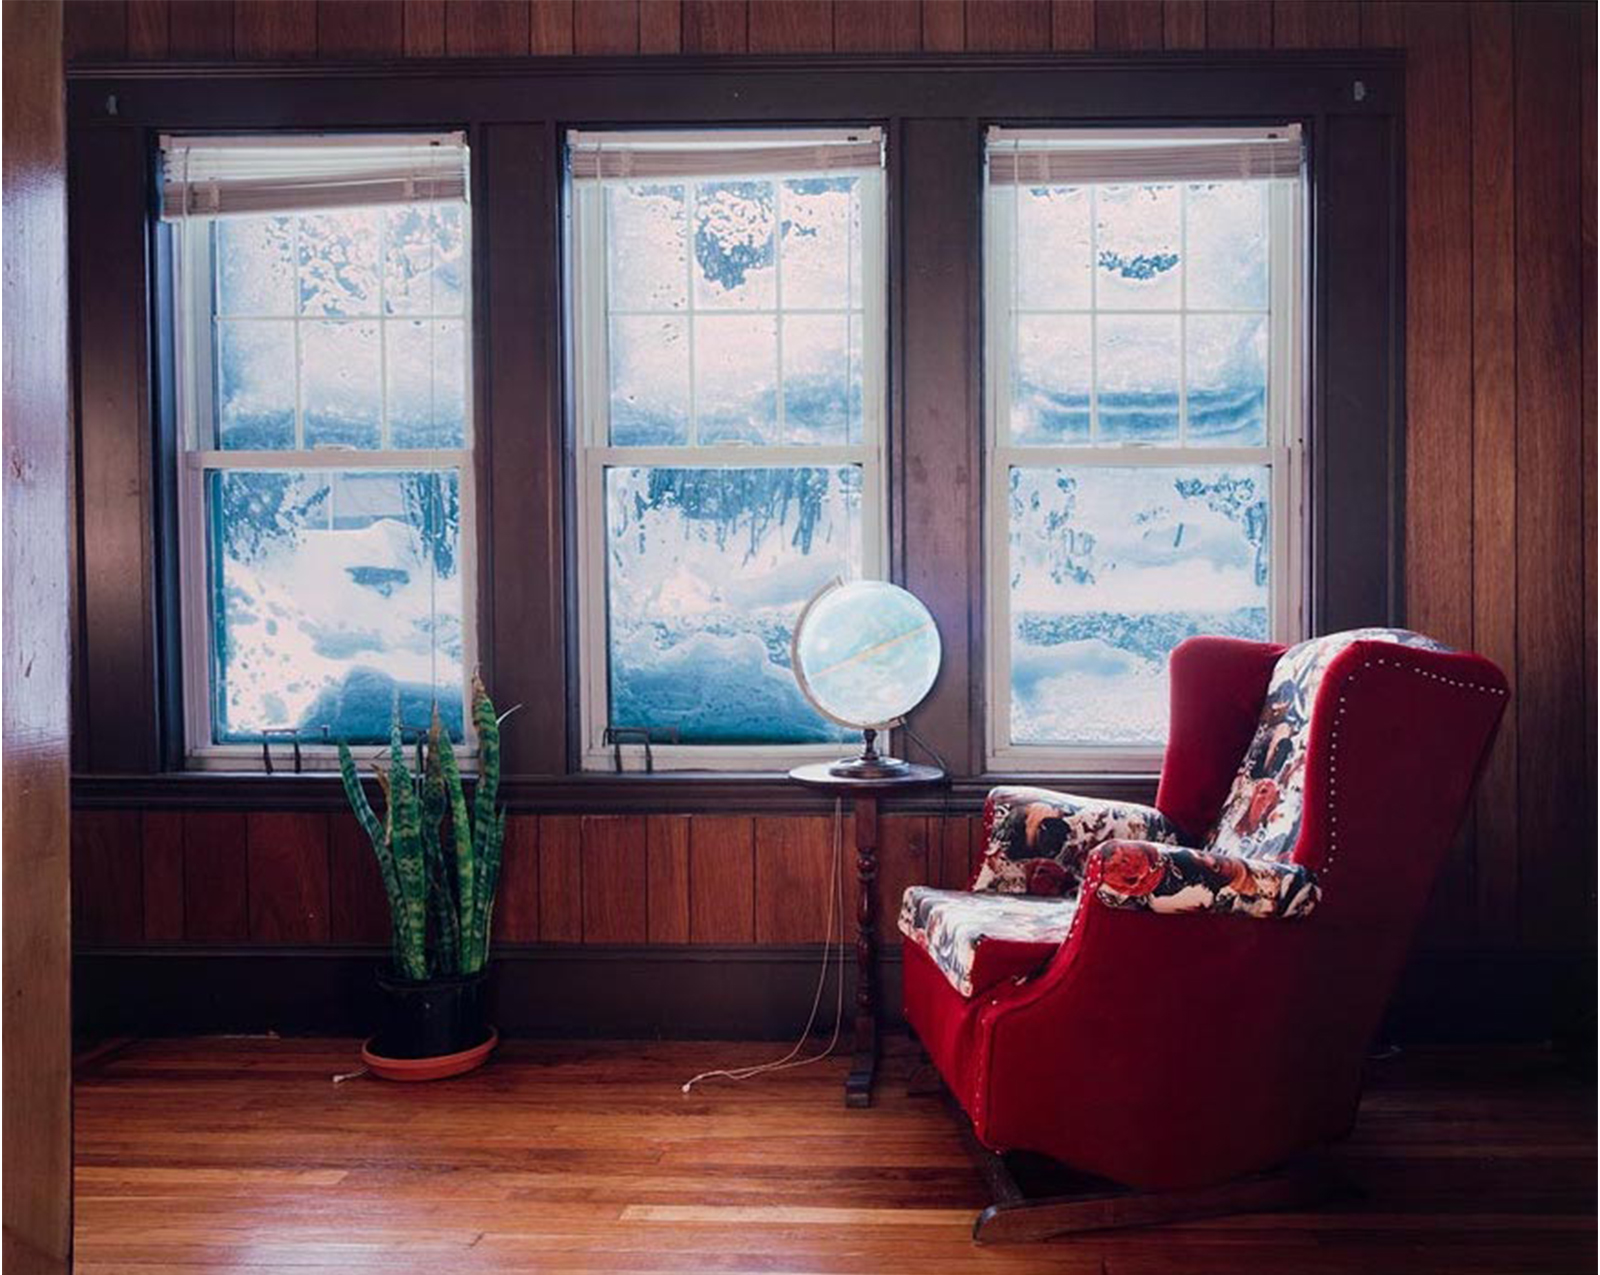 interior, wood paneled room, wood floor, succulent in pot on floor at left, globe with interior light on small round table near padded rocker with red upholstery on sides and back and animal print upholstery on cushion, arms and interior back horizontal to three windows that heavily frosted over barely showing snowy landscape outside